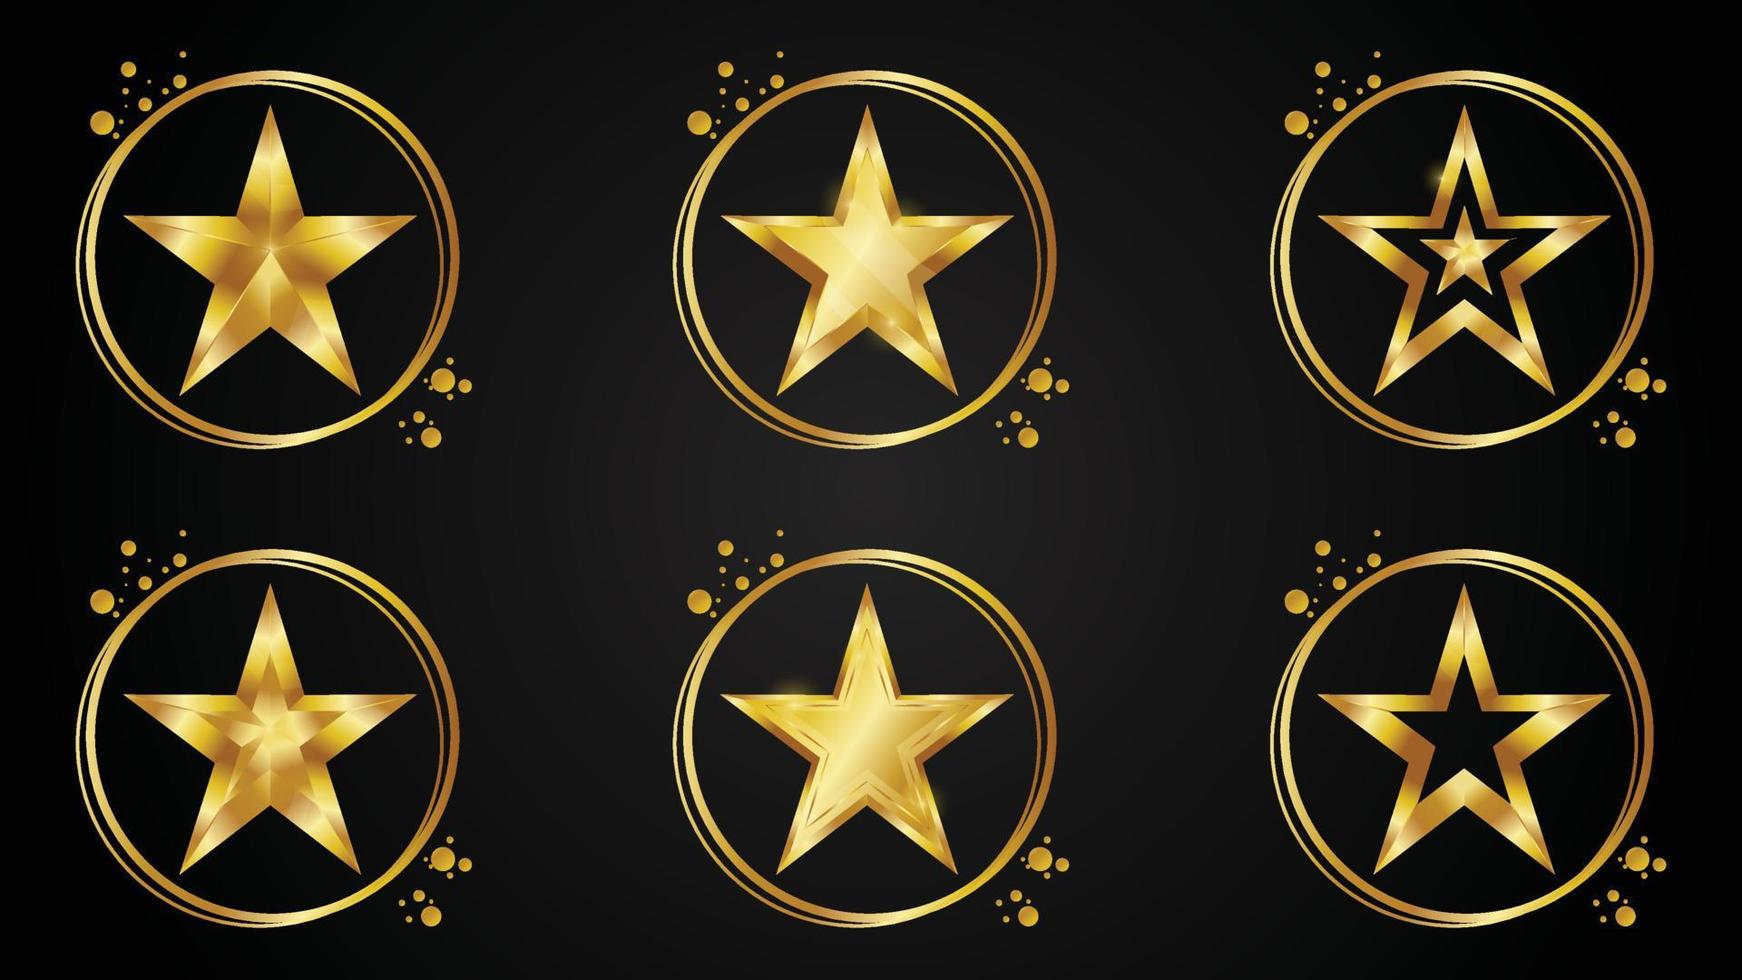 Set of golden stars with gold circle ring vector illustration isolated on white background.